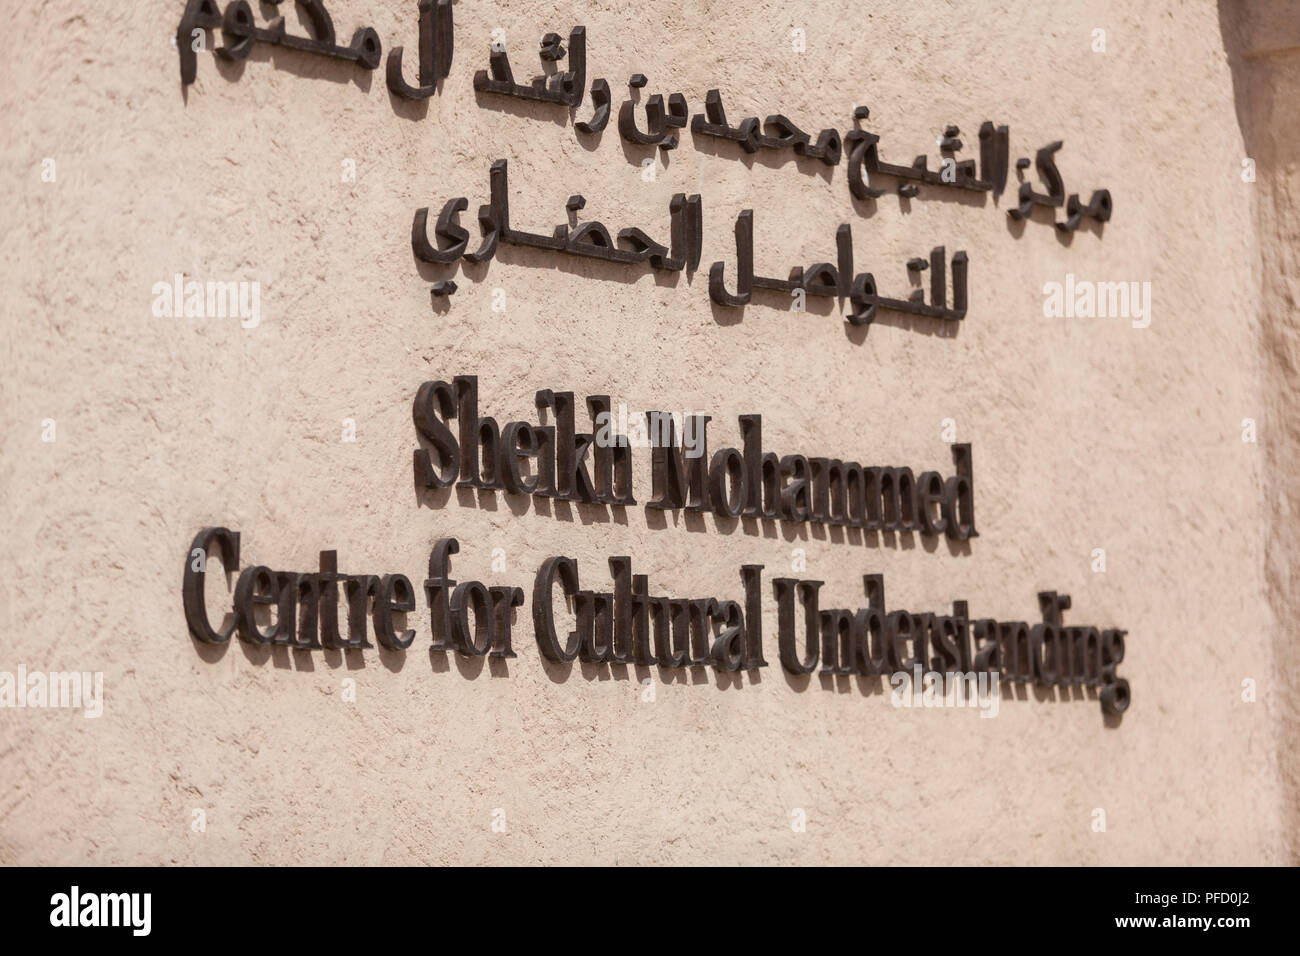 Sheikh Mohammed Centre for Cultural Understanding Stock Photo